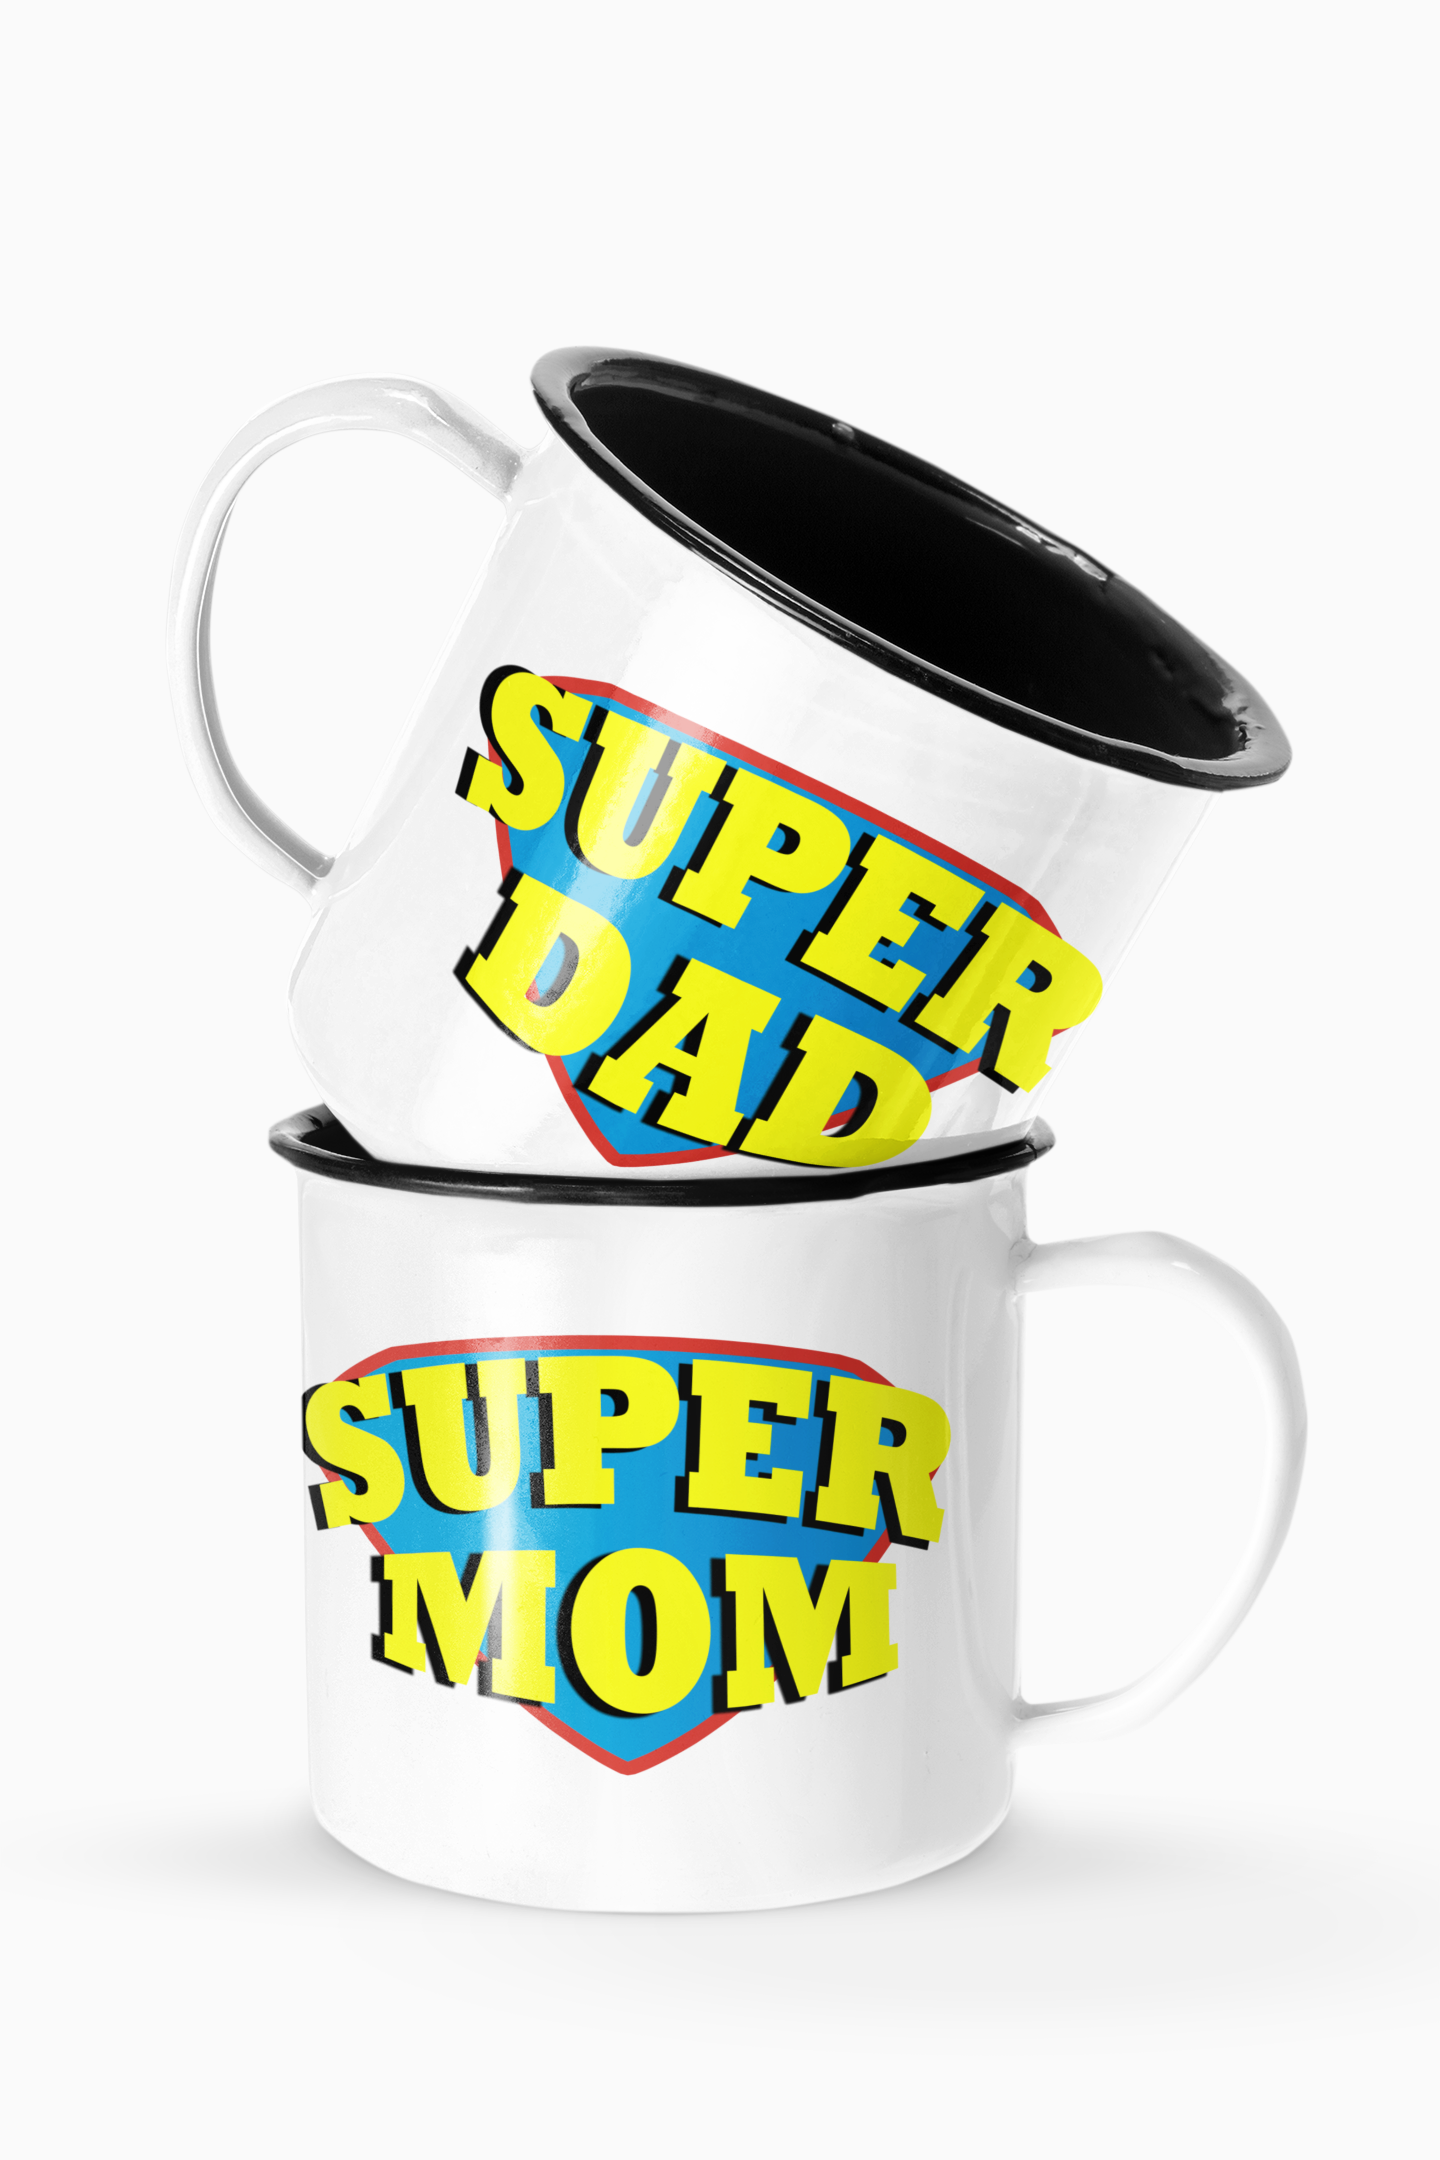 Super Dad And Super Mom Couples Enamel Camp Cup Set Wedding Enamel Couples Gift